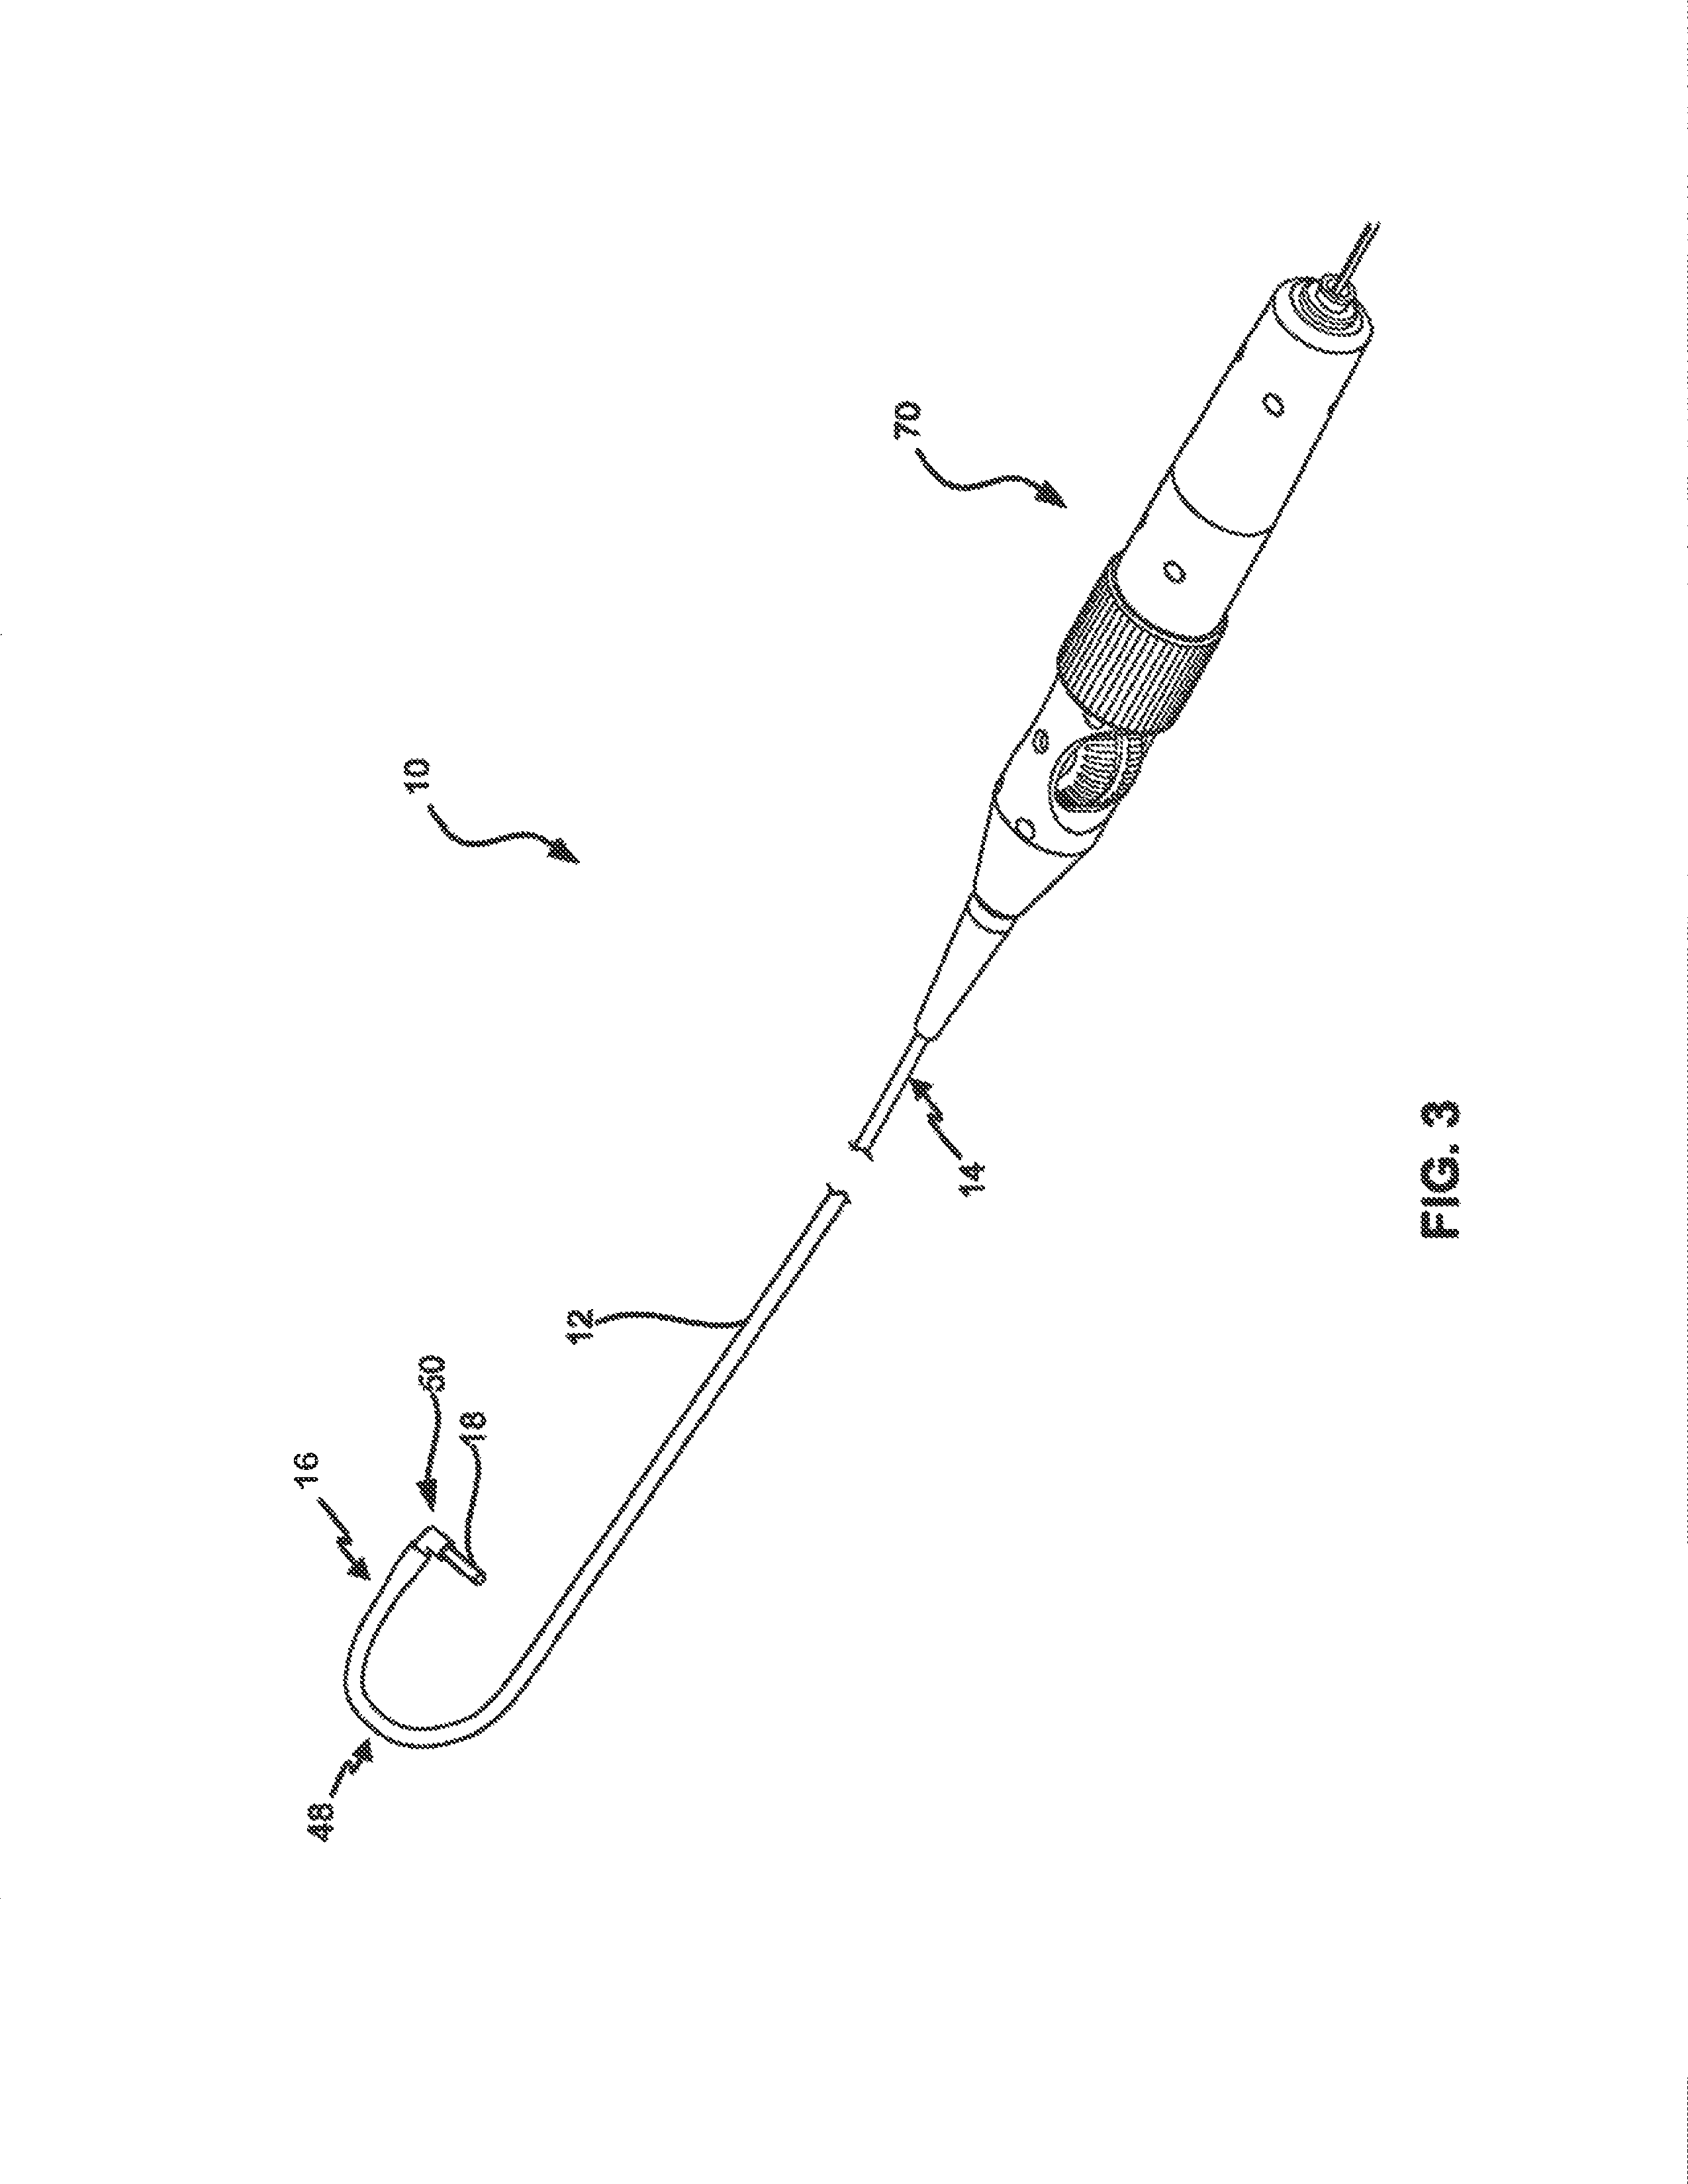 Ultrasound imaging catheter with pivoting head